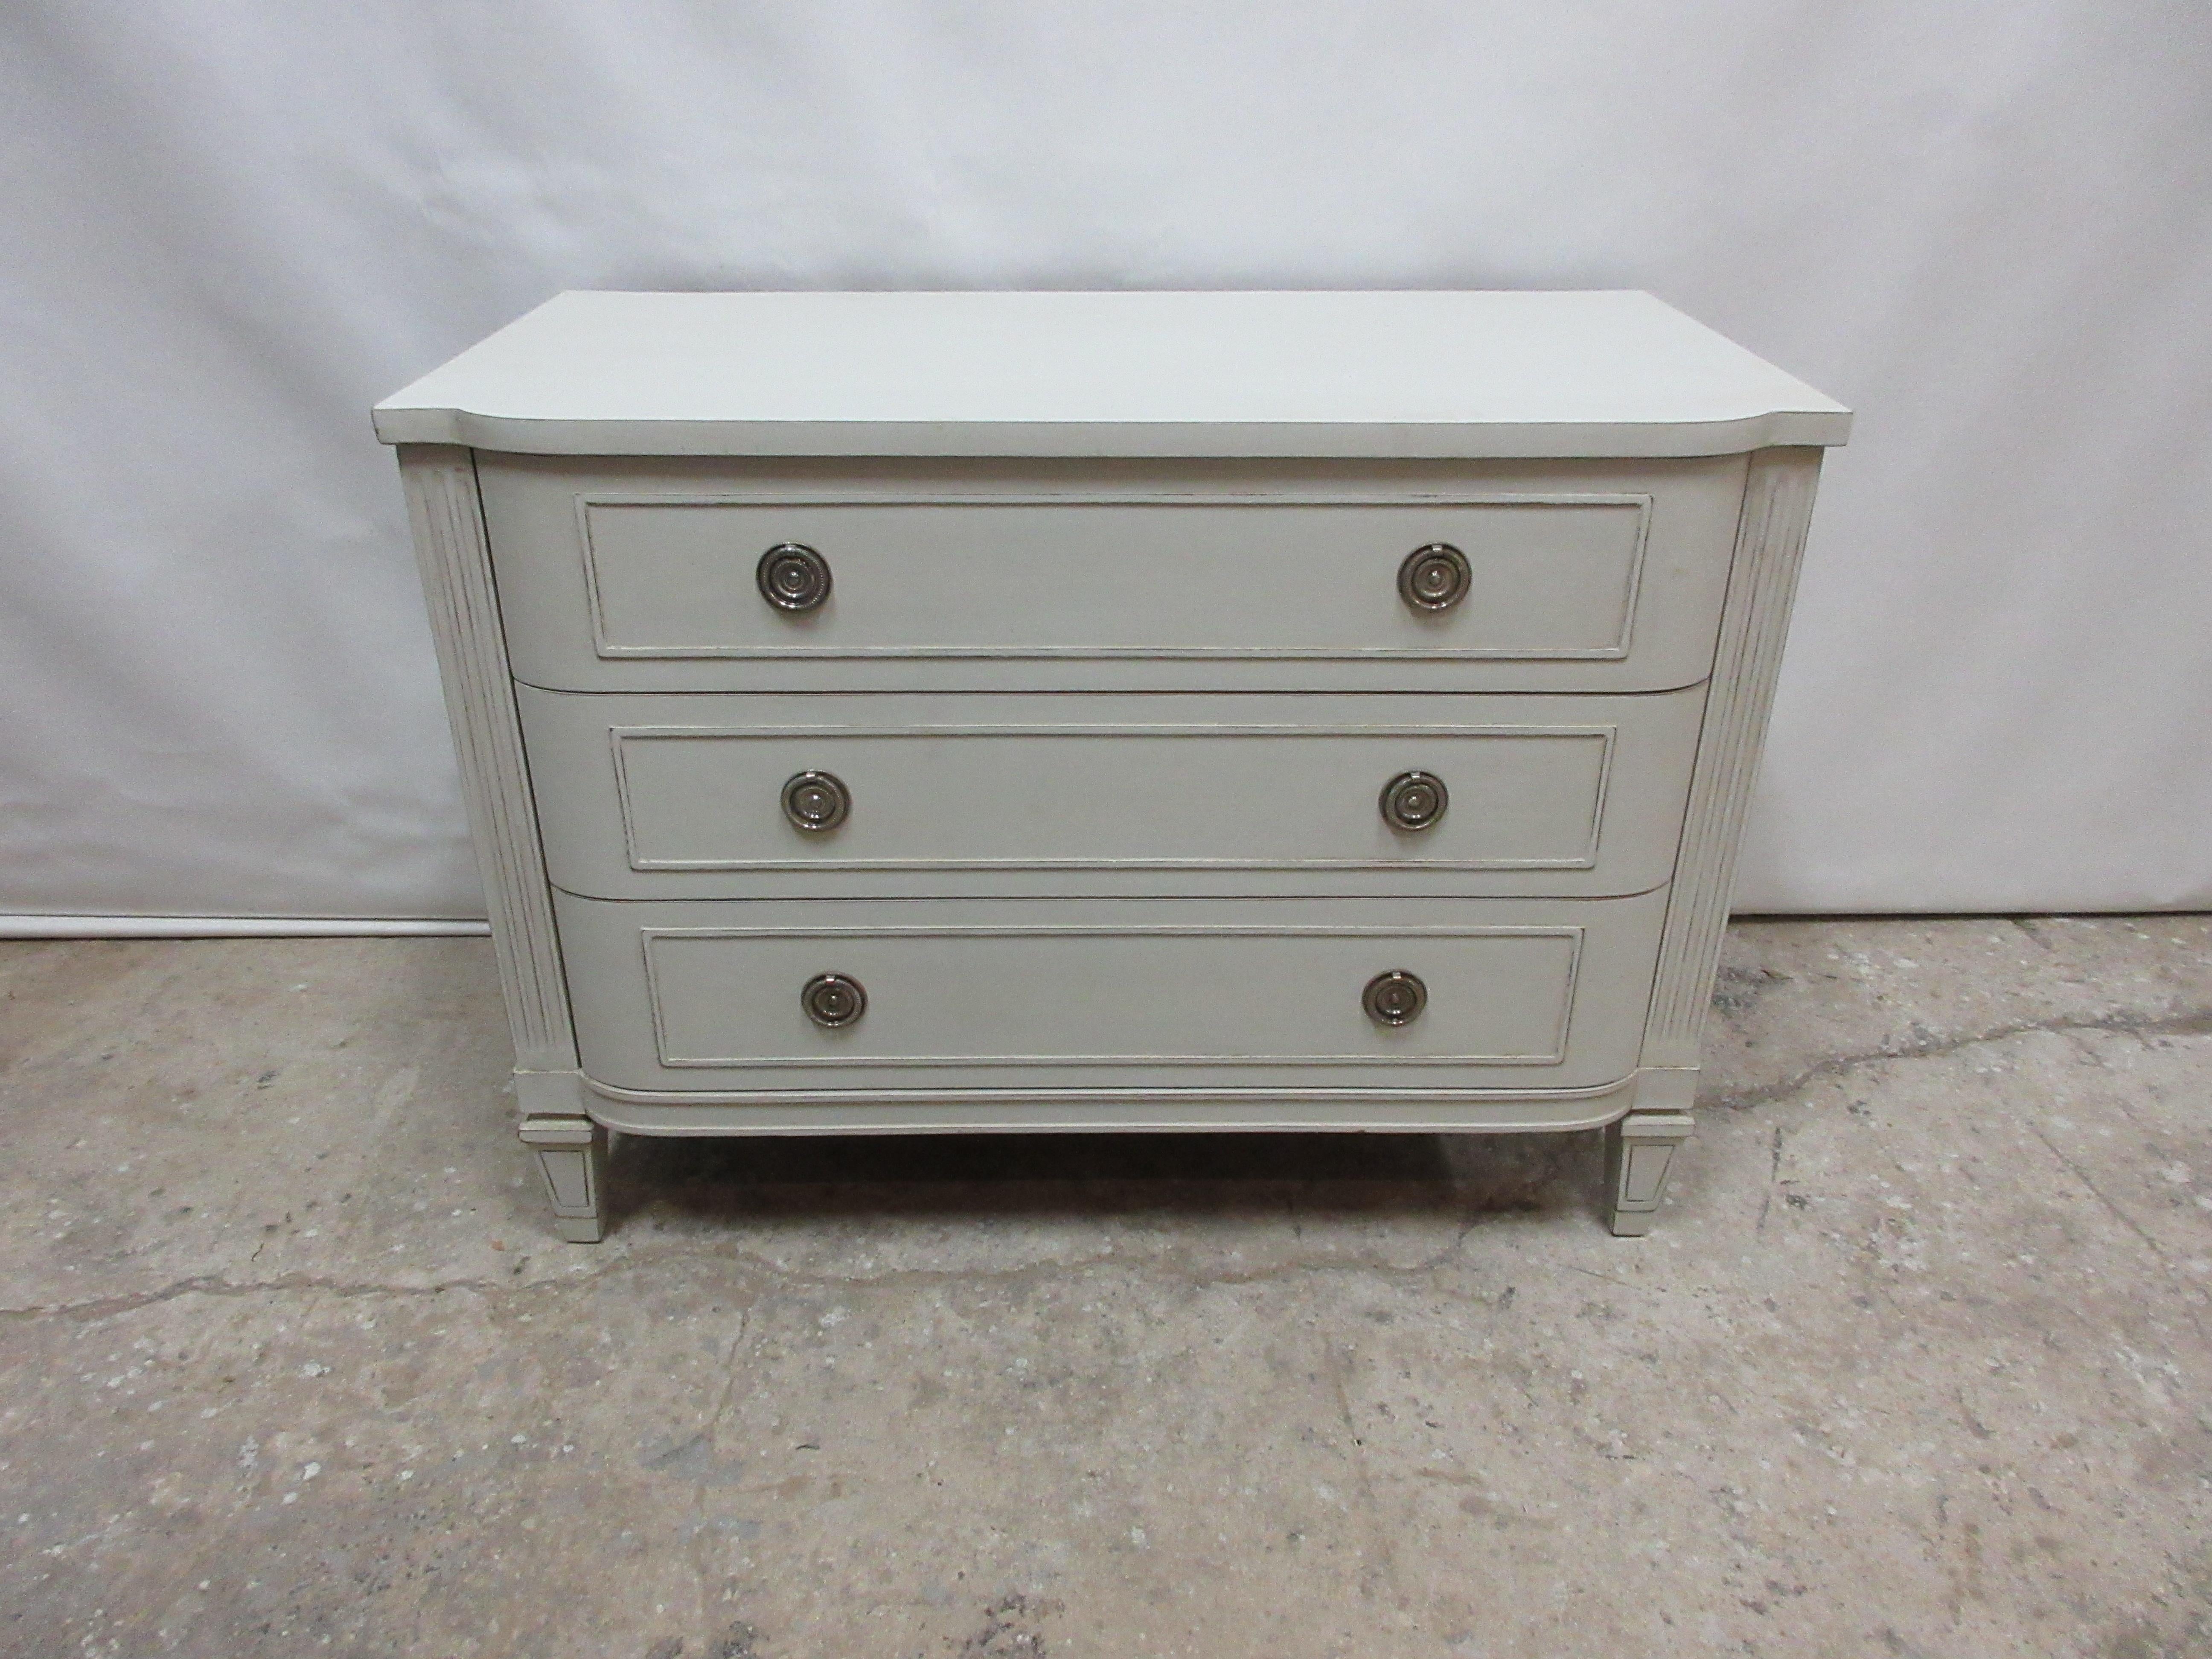 This is a Gustavian style chest of drawers, its been restored and repainted with milk paints 